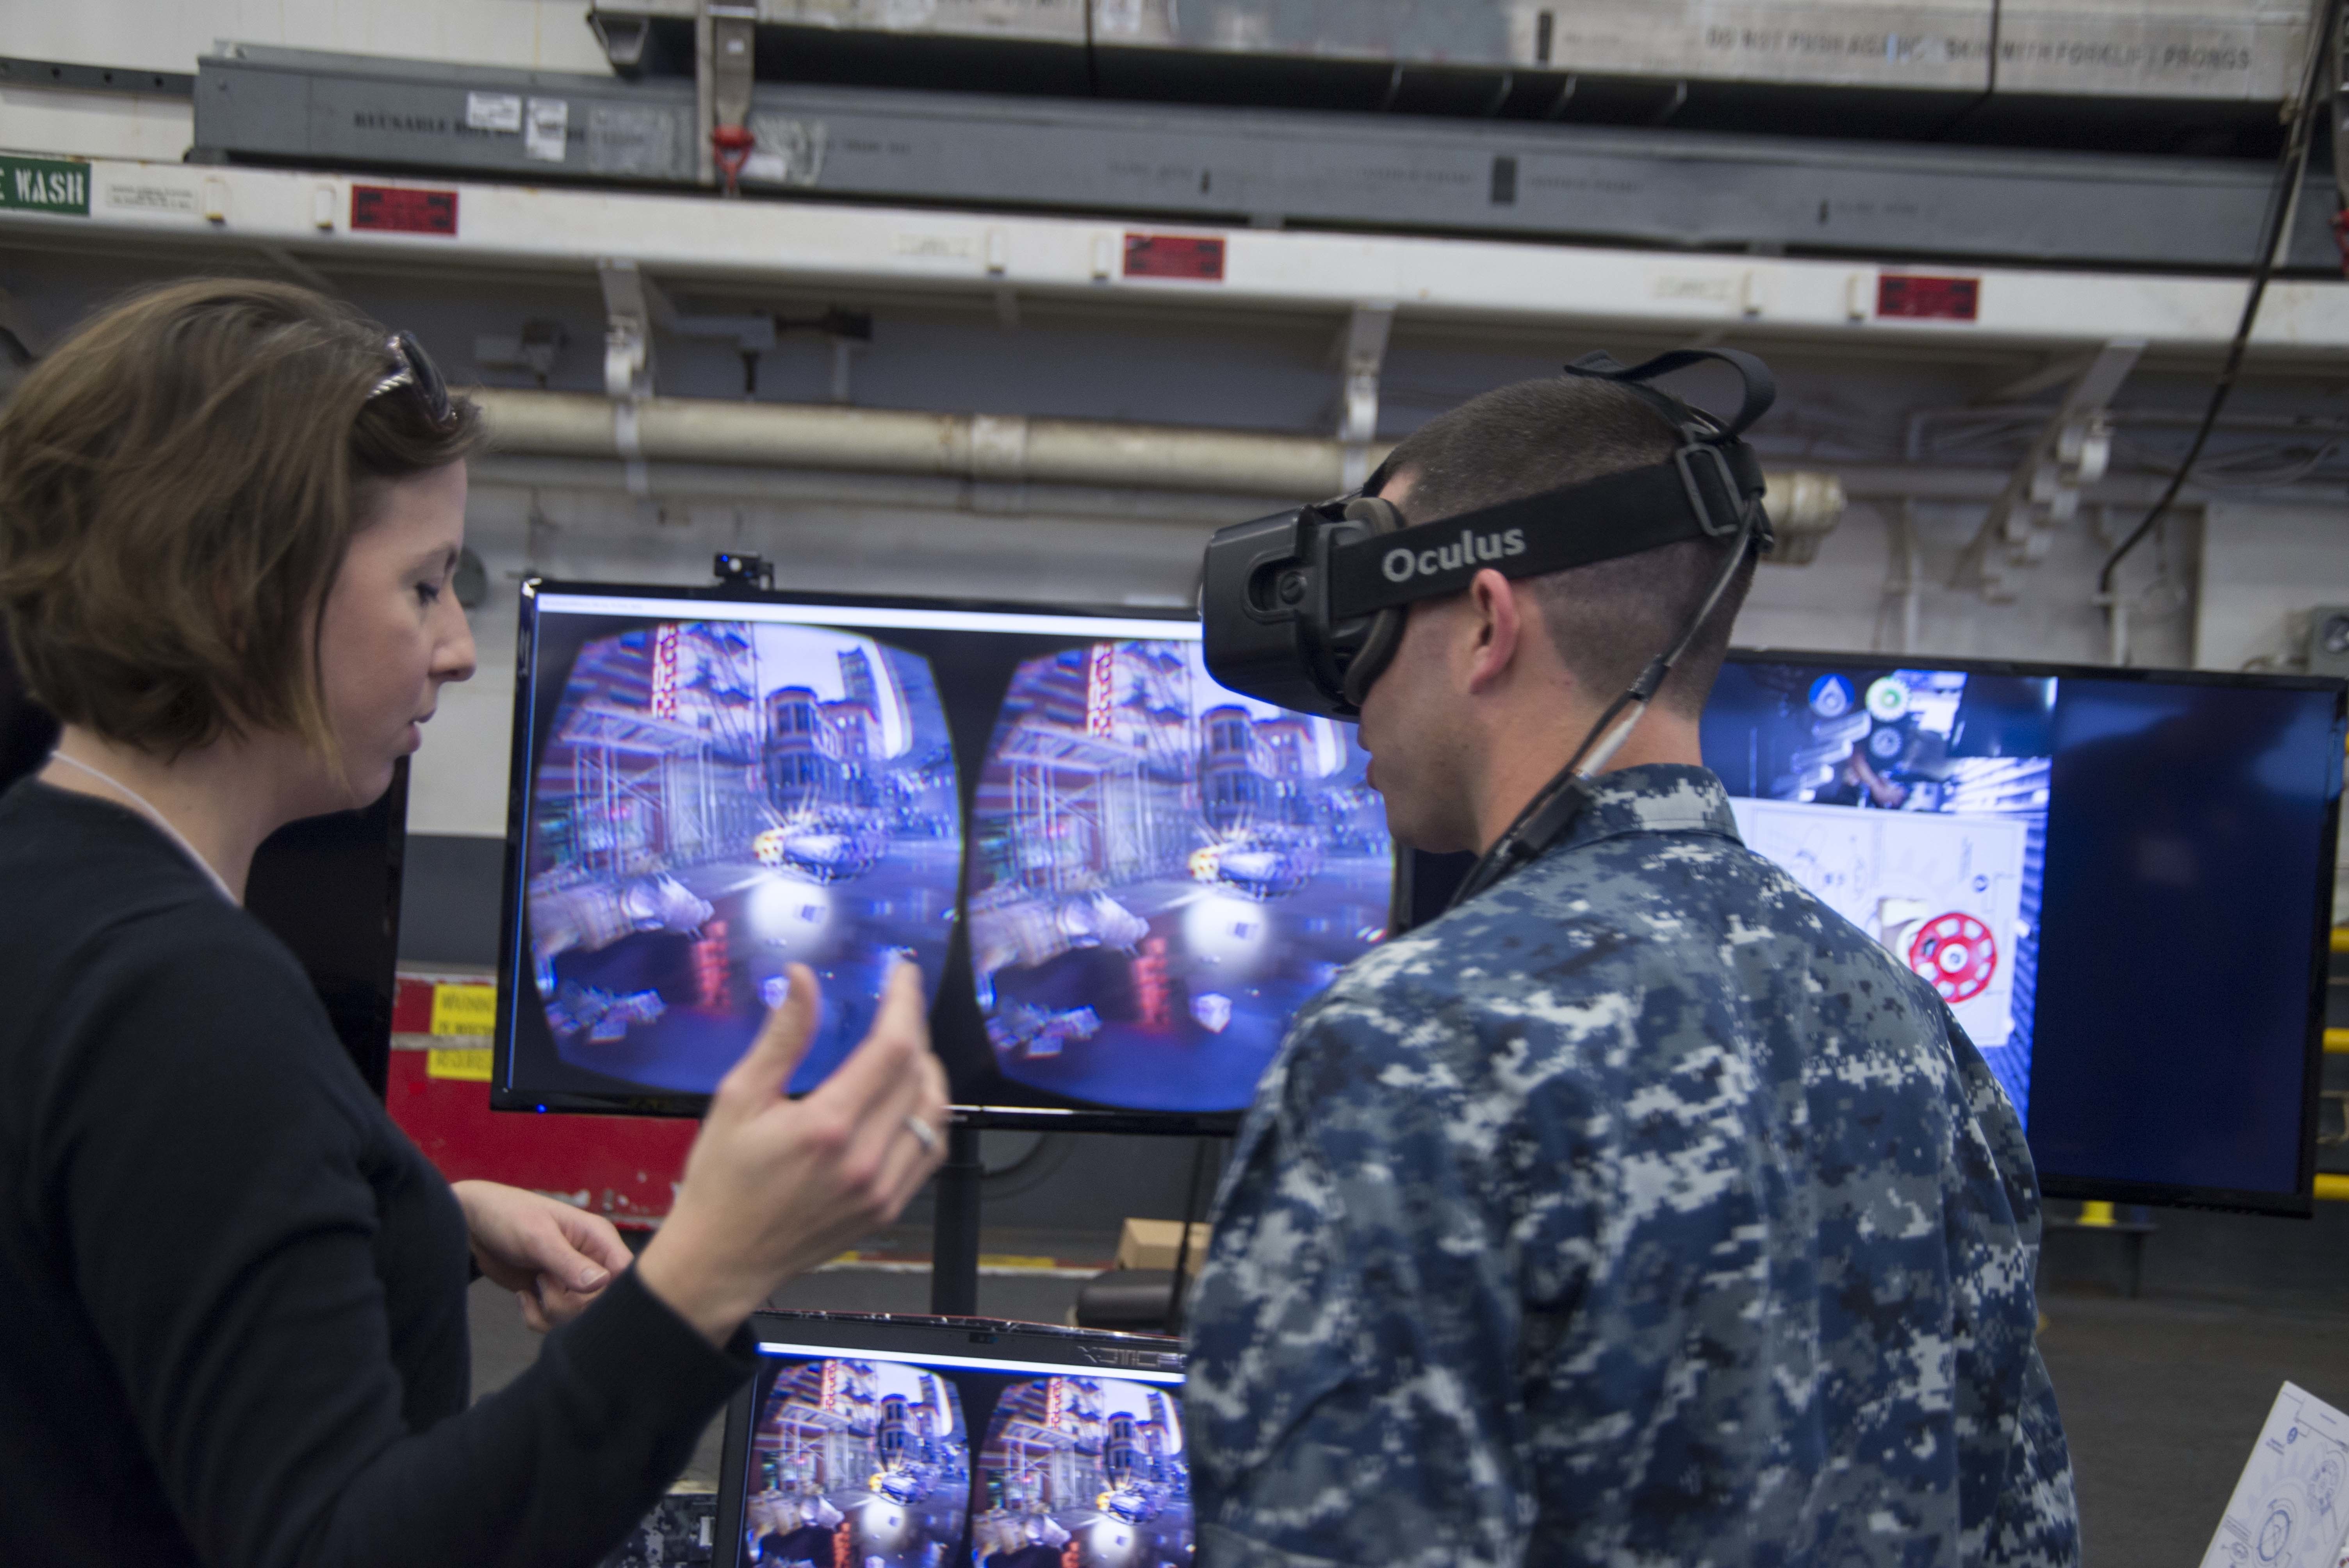 Lt. Stephen Gallagher tries a virtual reality headset at the Innovation Jam hosted aboard Wasp-class amphibious assault ship USS Essex (LHD 2) in March 2016. Commander, U.S. Pacific Fleet’s Bridge Program welcomes the Space and Naval Warfare Systems Center Pacific Innovation Jam, sponsored by OPNAV N4 Fleet Readiness and Logistics and the Office of Naval Research. The Innovation Jam showcases pioneering concepts and rapid solutions, and one of the bright ideas will be selected for initial funding, development, prototyping and possible transition to Fleet-wide implementation. US Navy photo.